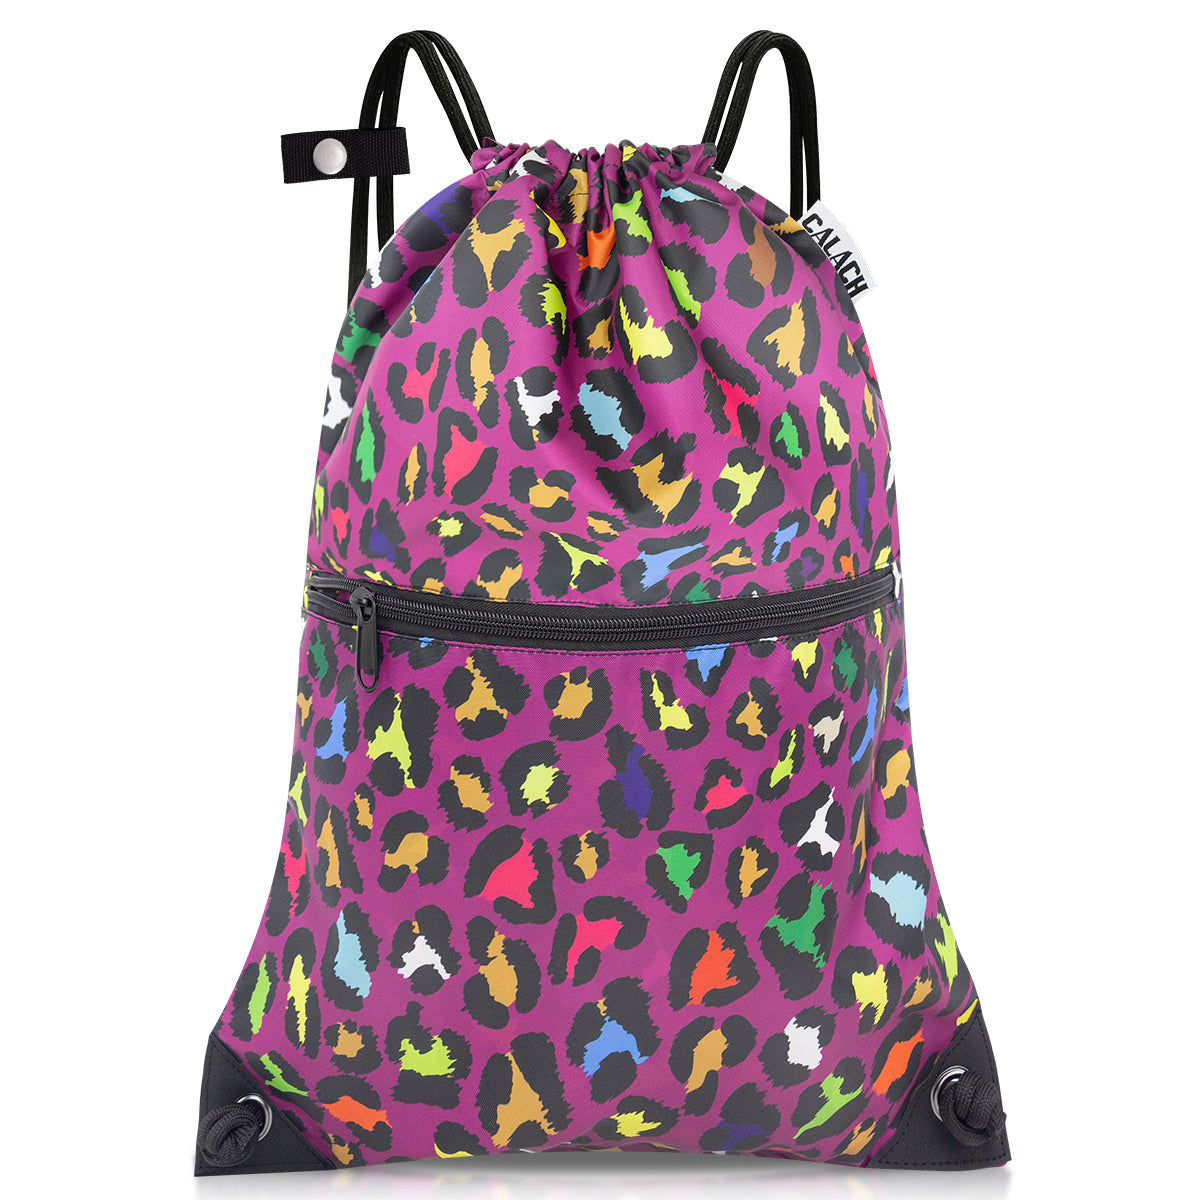 Drawstring Backpack Sports Gym Bag With Multi Pockets Leopard print